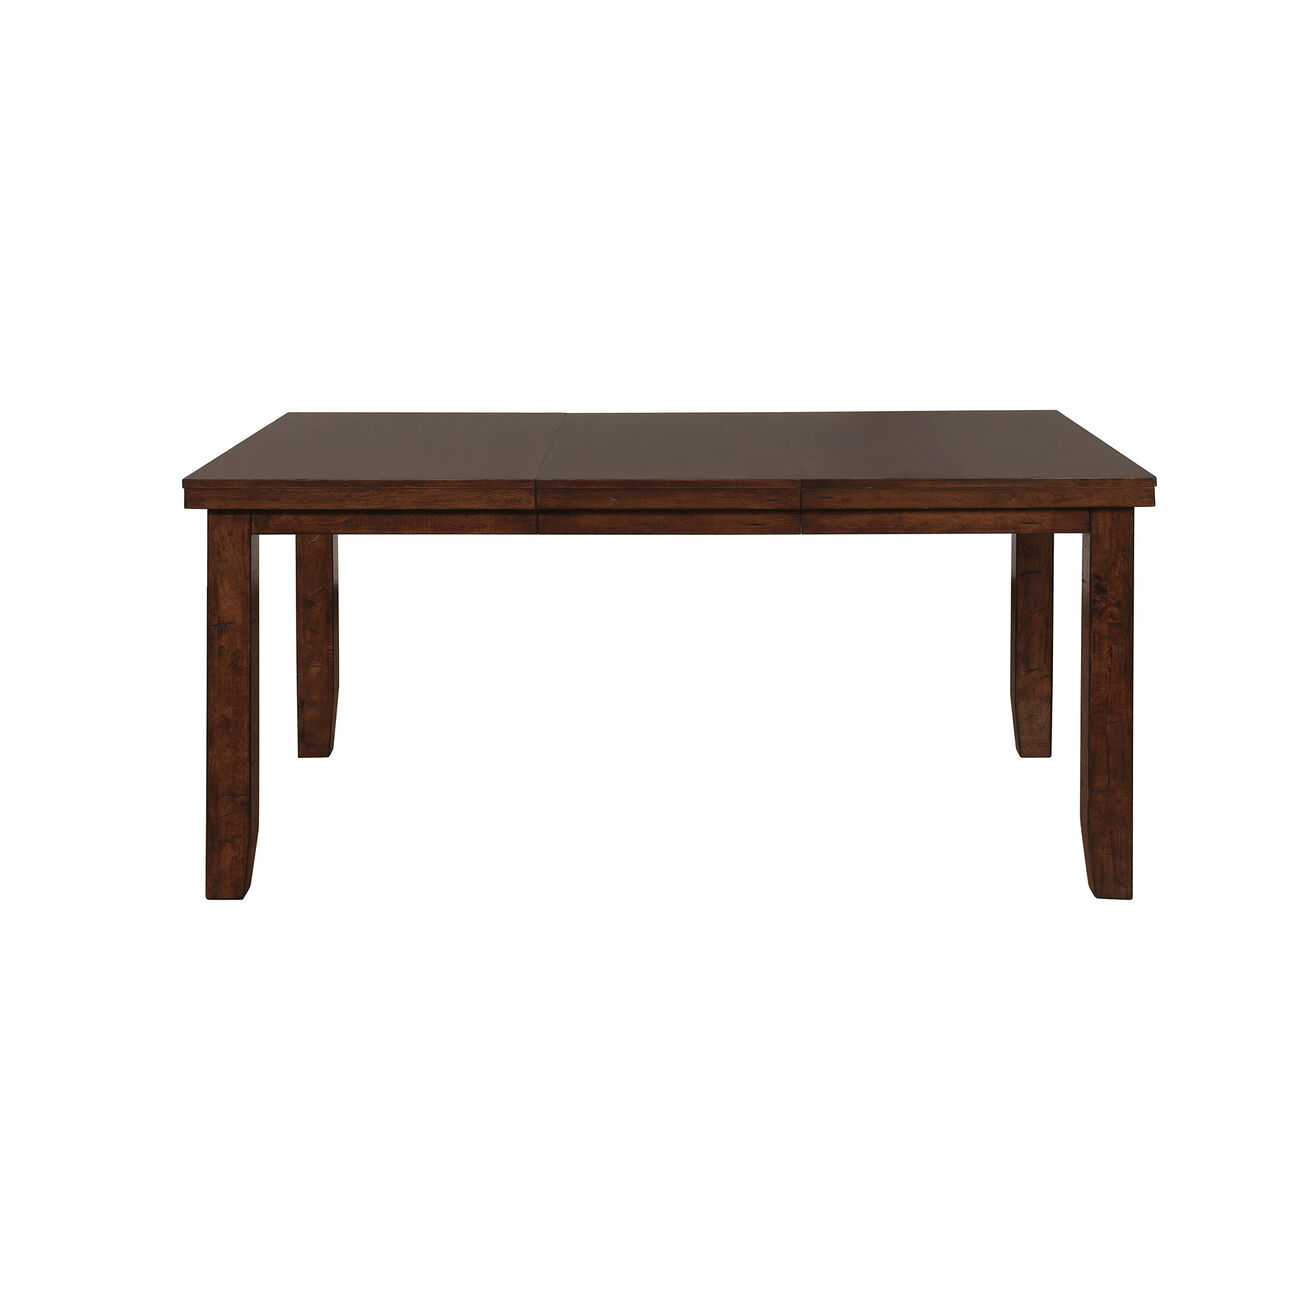 Wooden Rectangular Dining Table with 18 Inch Extension Leaf, Brown